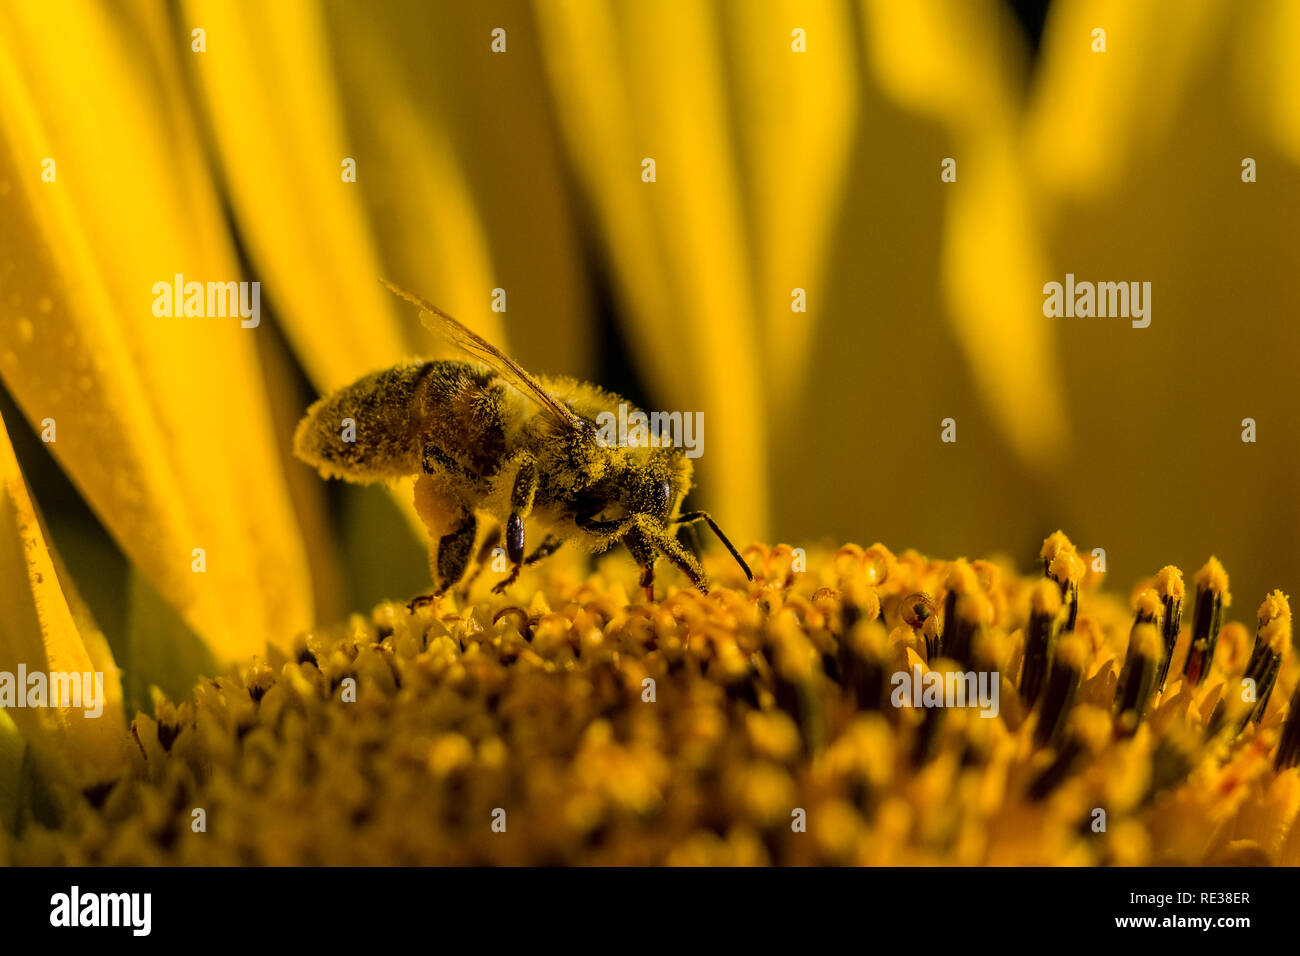 A honeybee (Apis mellifera carnica) is collecting pollens on a yellow sunflower (Helianthus annuus) Stock Photo